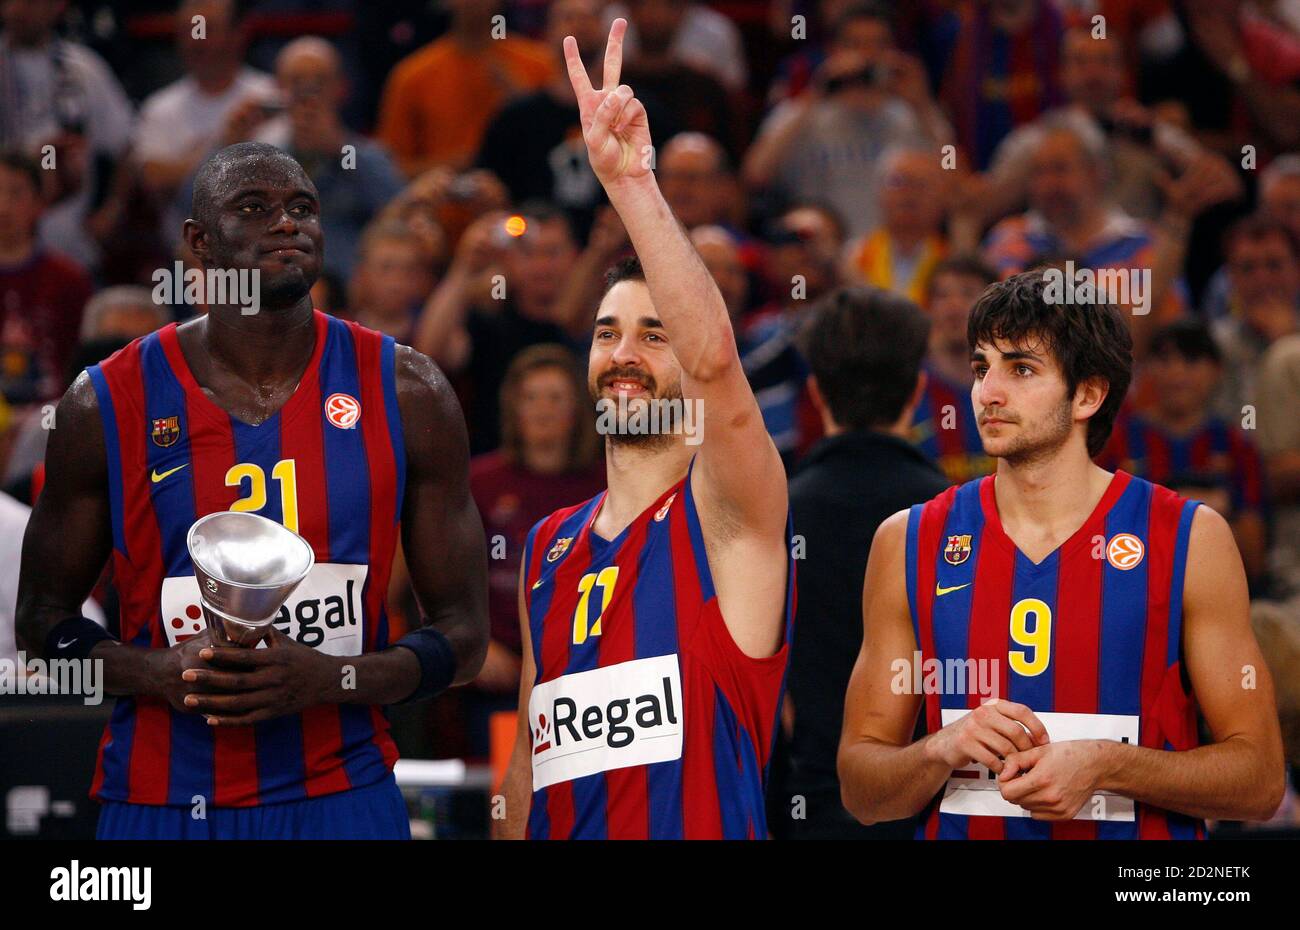 Regal FC Barcelona's Juan Carlos Navarro (C) celebrates with his teammates  Ndong Boniface (L) and Ricky Rubio after being awarded Most Valuable Player  of the Euroleague Basketball Final Four in Paris May